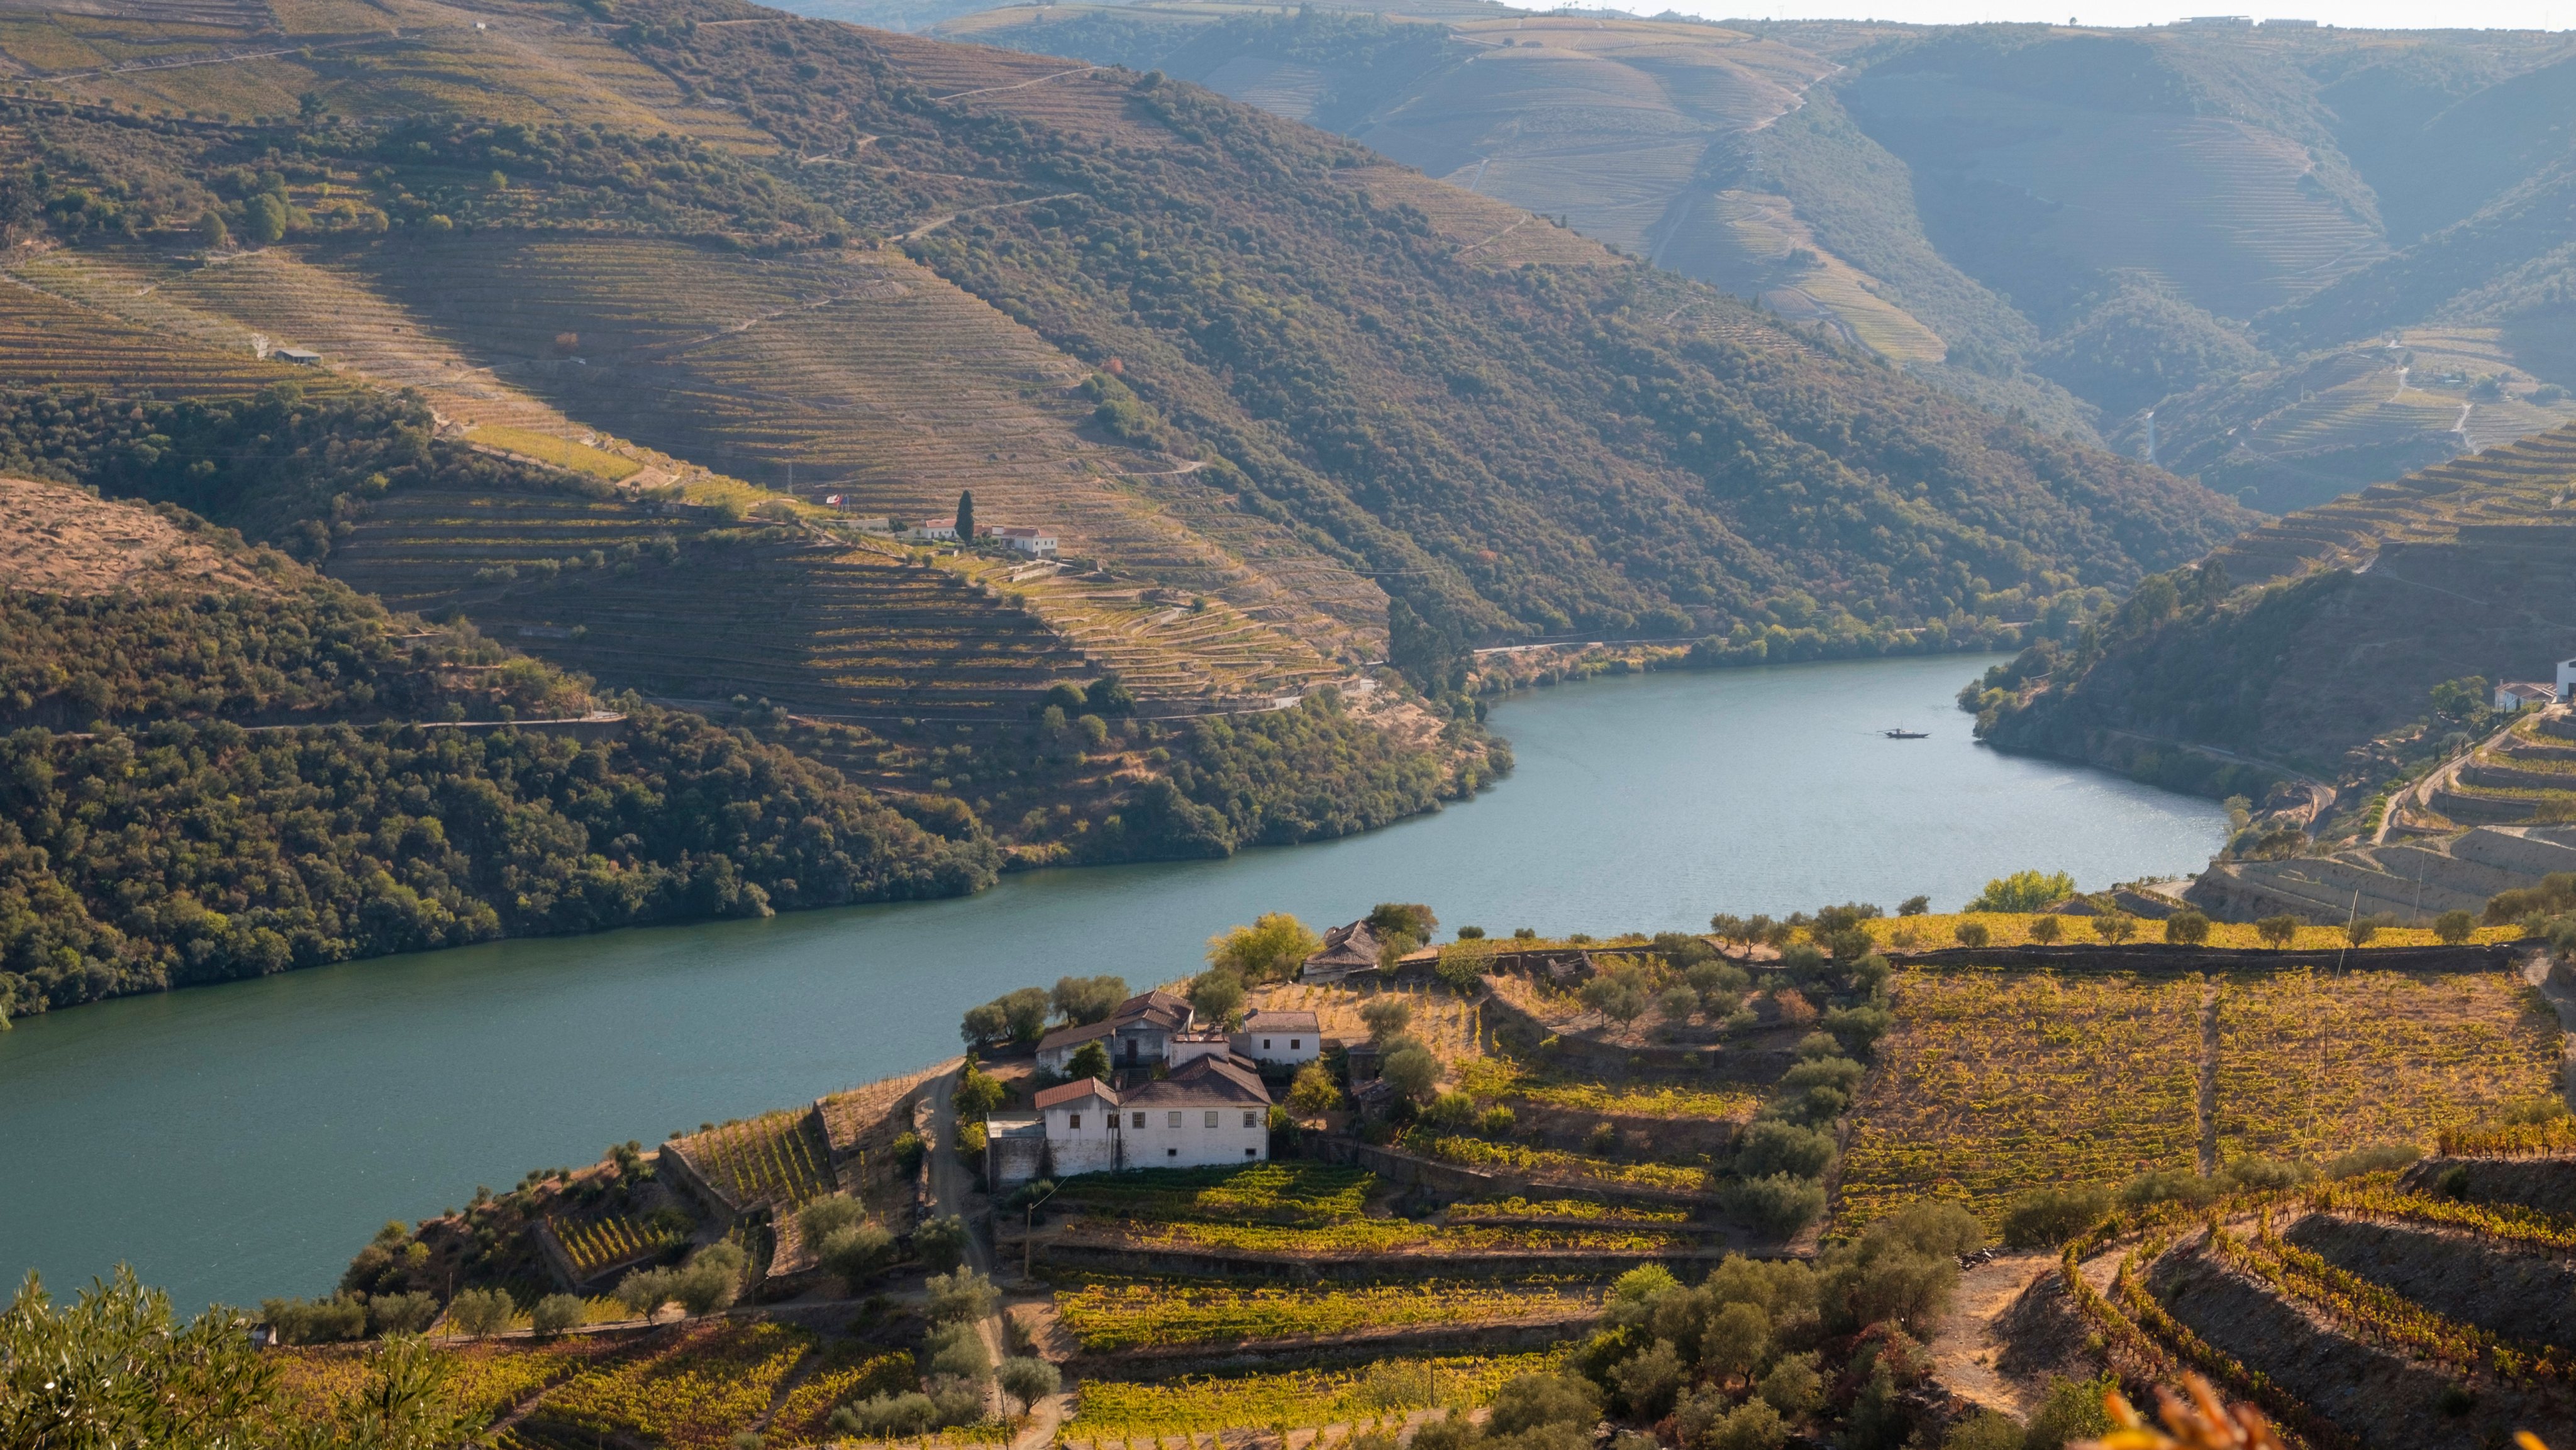 Douro River with river cruise boat near Pinhao, Douro River Valley, Portugal